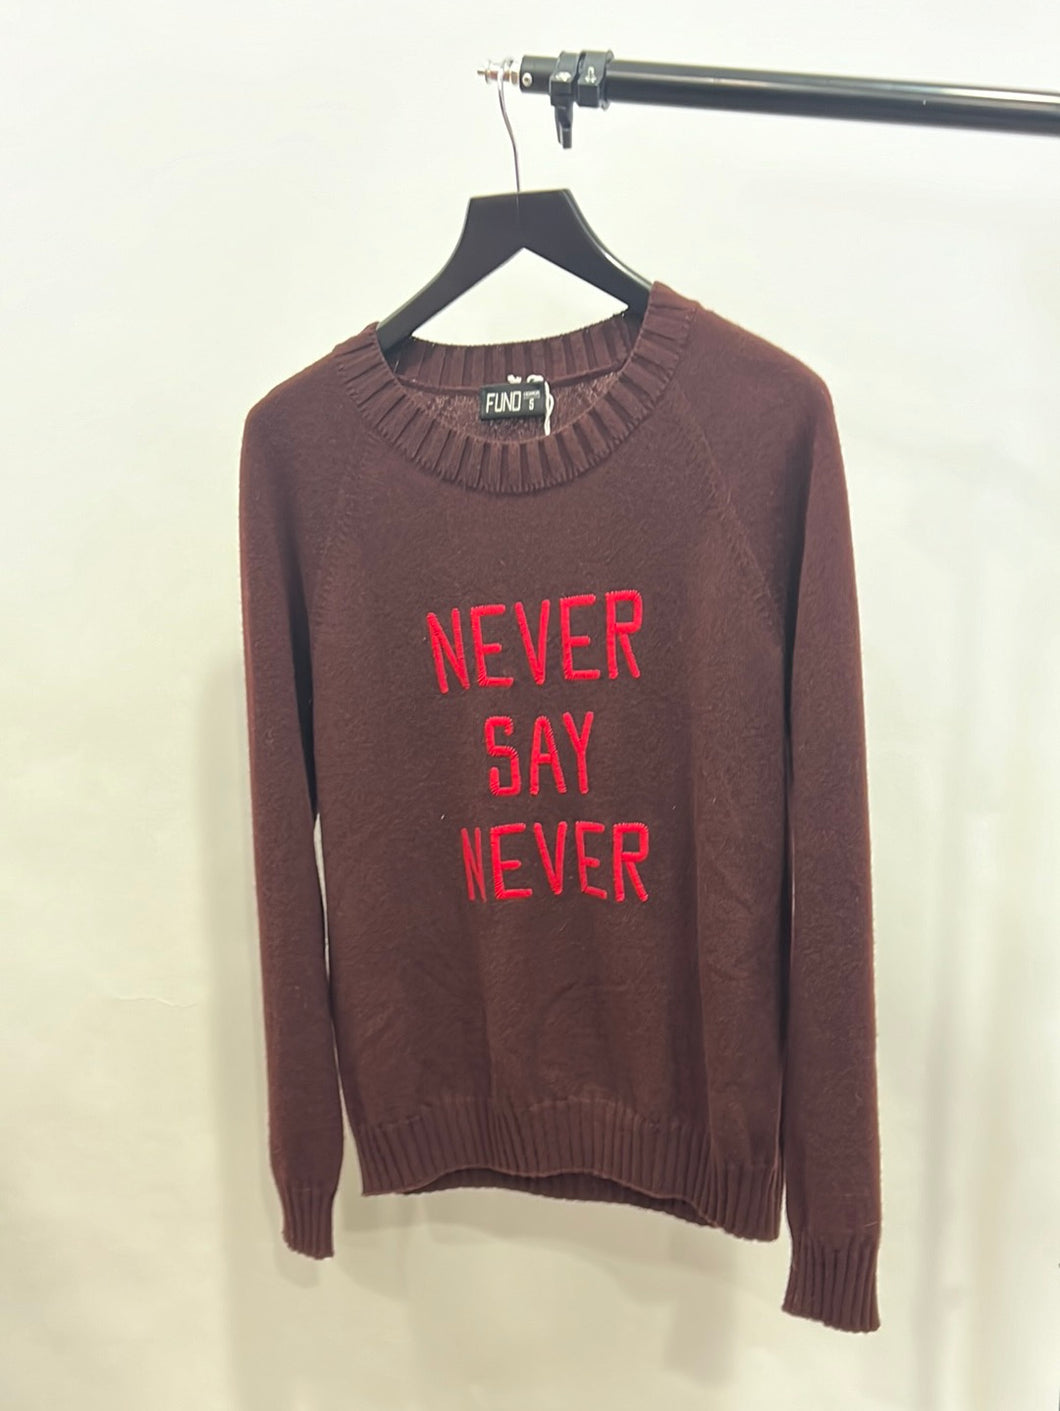 Fund Jumpers Burgundy Cashmere Never Say Never, Size s